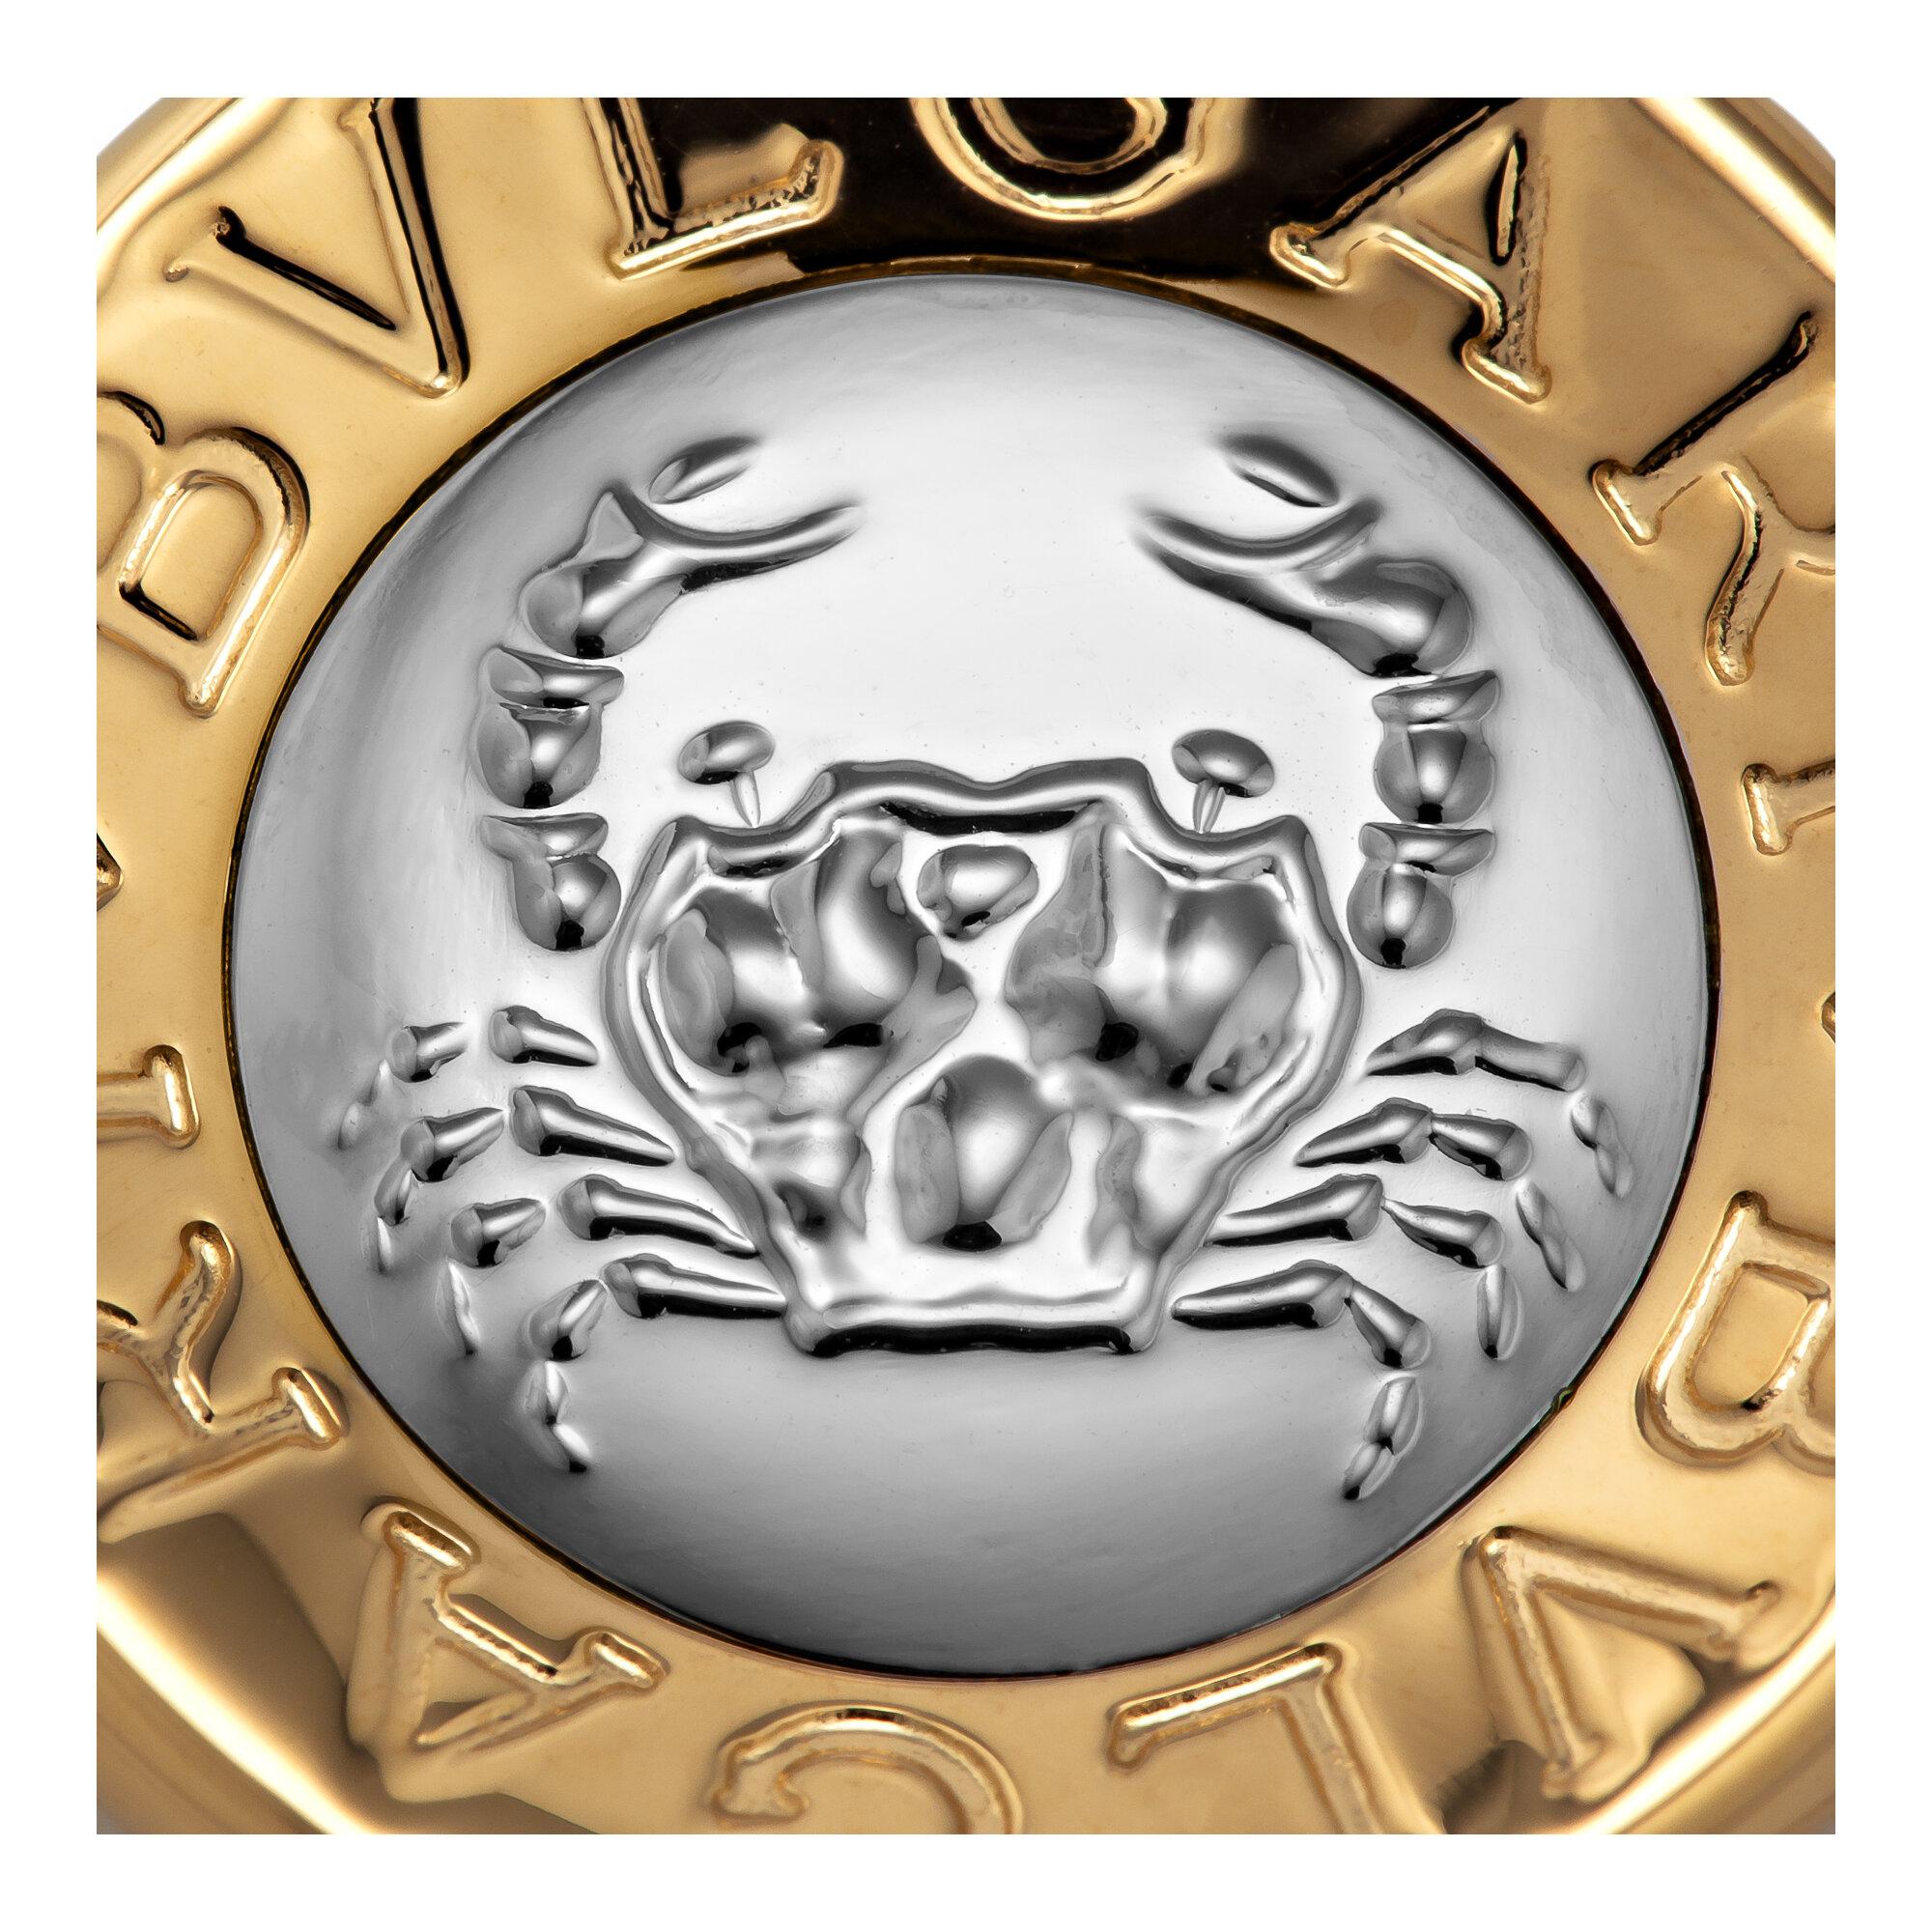 The zodiac Cancer sign of the crab weaves easily between both the sea and the shore representing this symbol's ability to adapt to all types of earthly situations.   And by wearing this Bulgari 18 karat white and yellow gold crab Cancer sign pendant